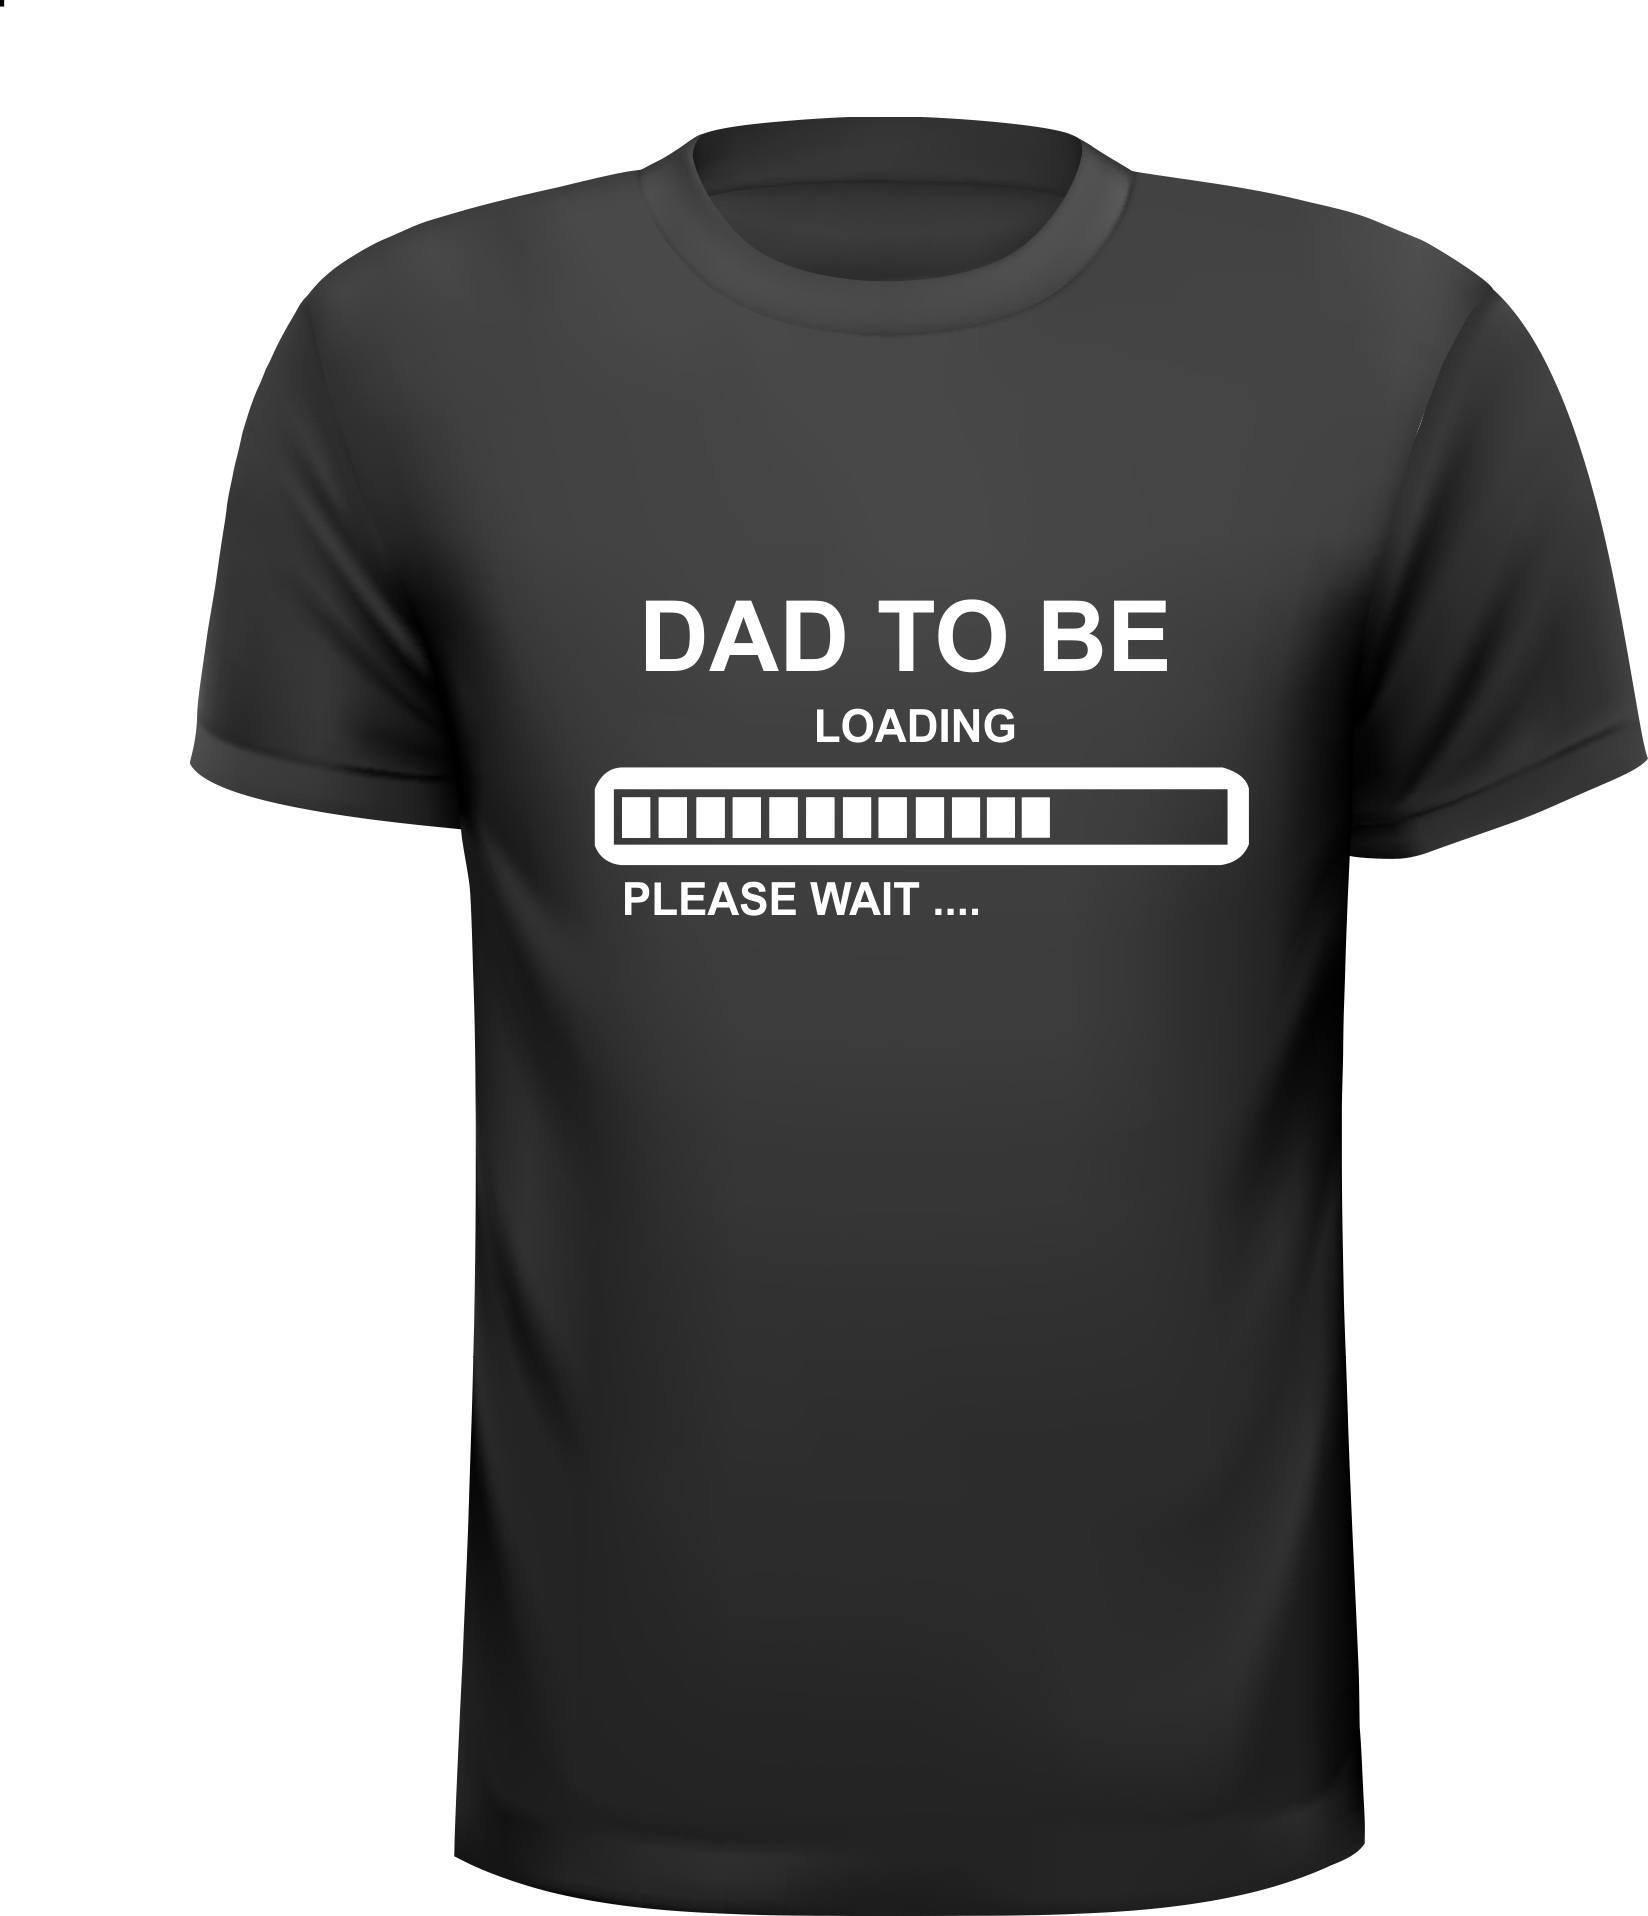 Dad to be loading please wait vader worden papa worden T-shirt